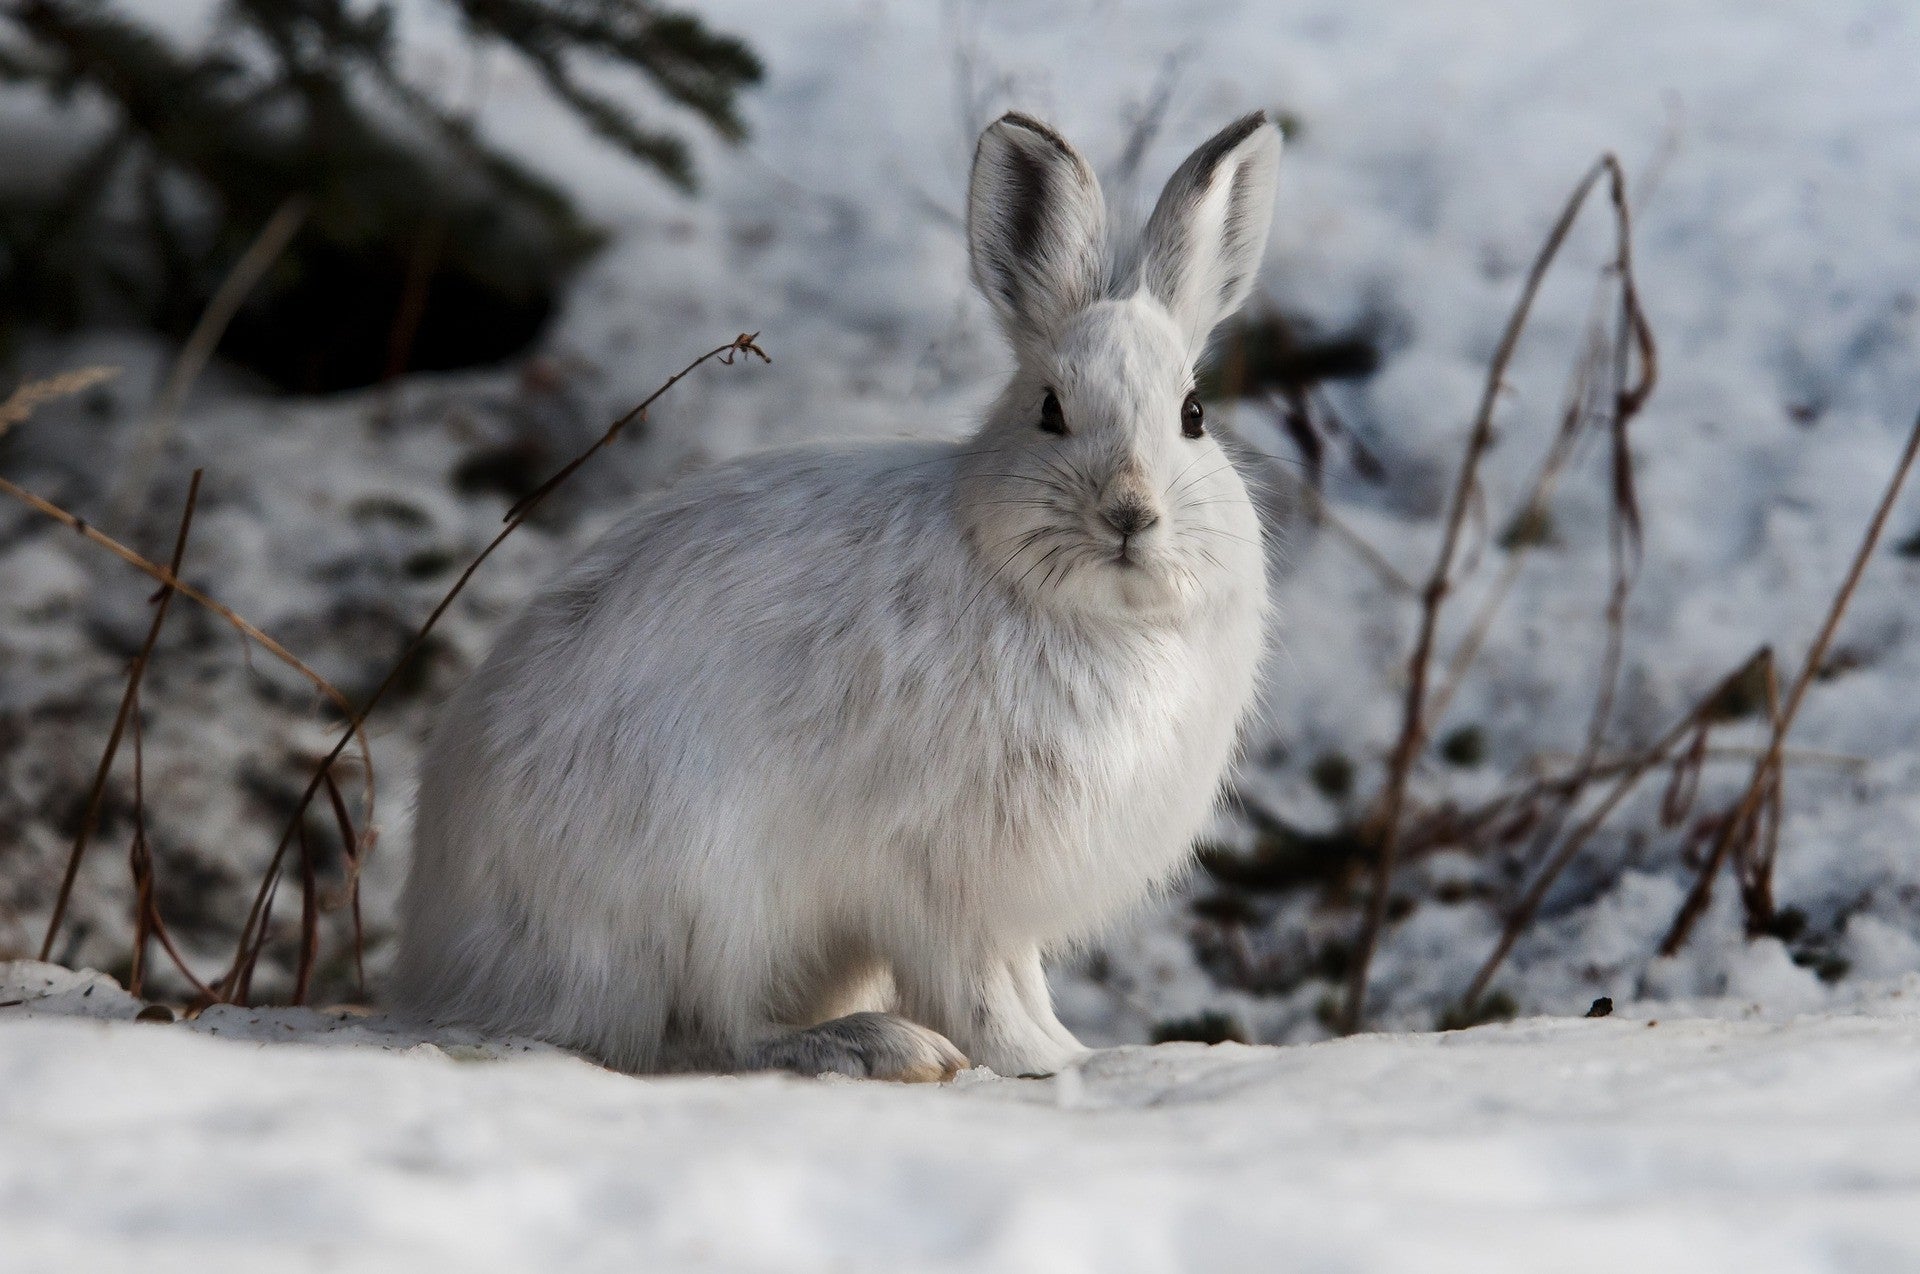 How to look after rabbits in winter